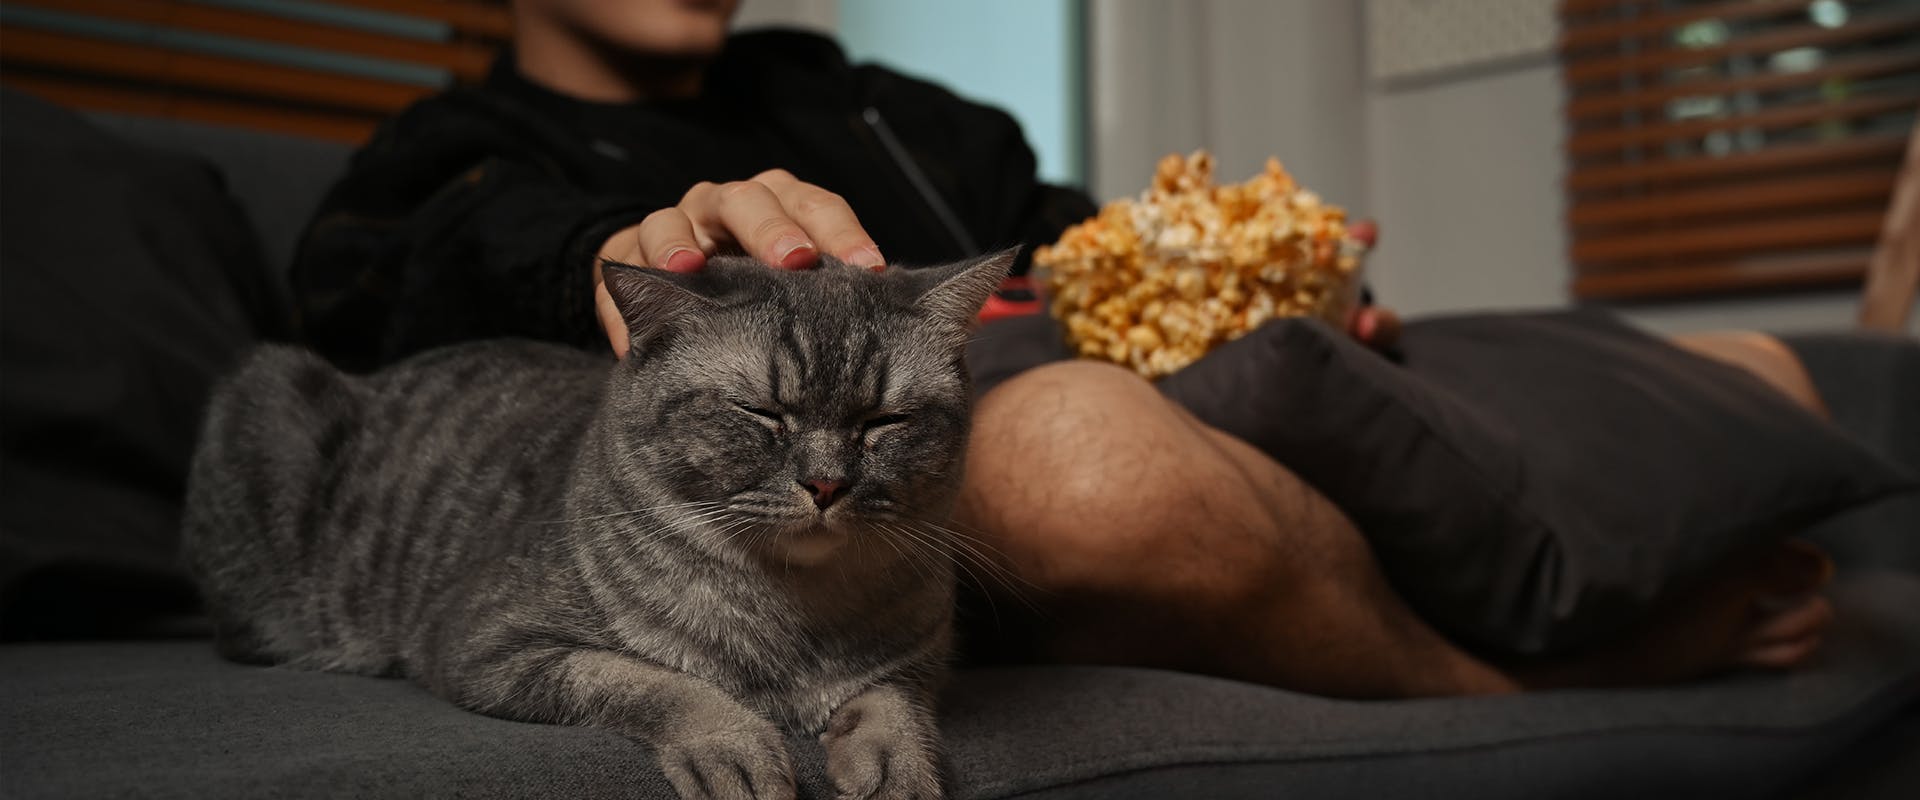 A man eating popcorn on the sofa, sitting next to a sleeping cat